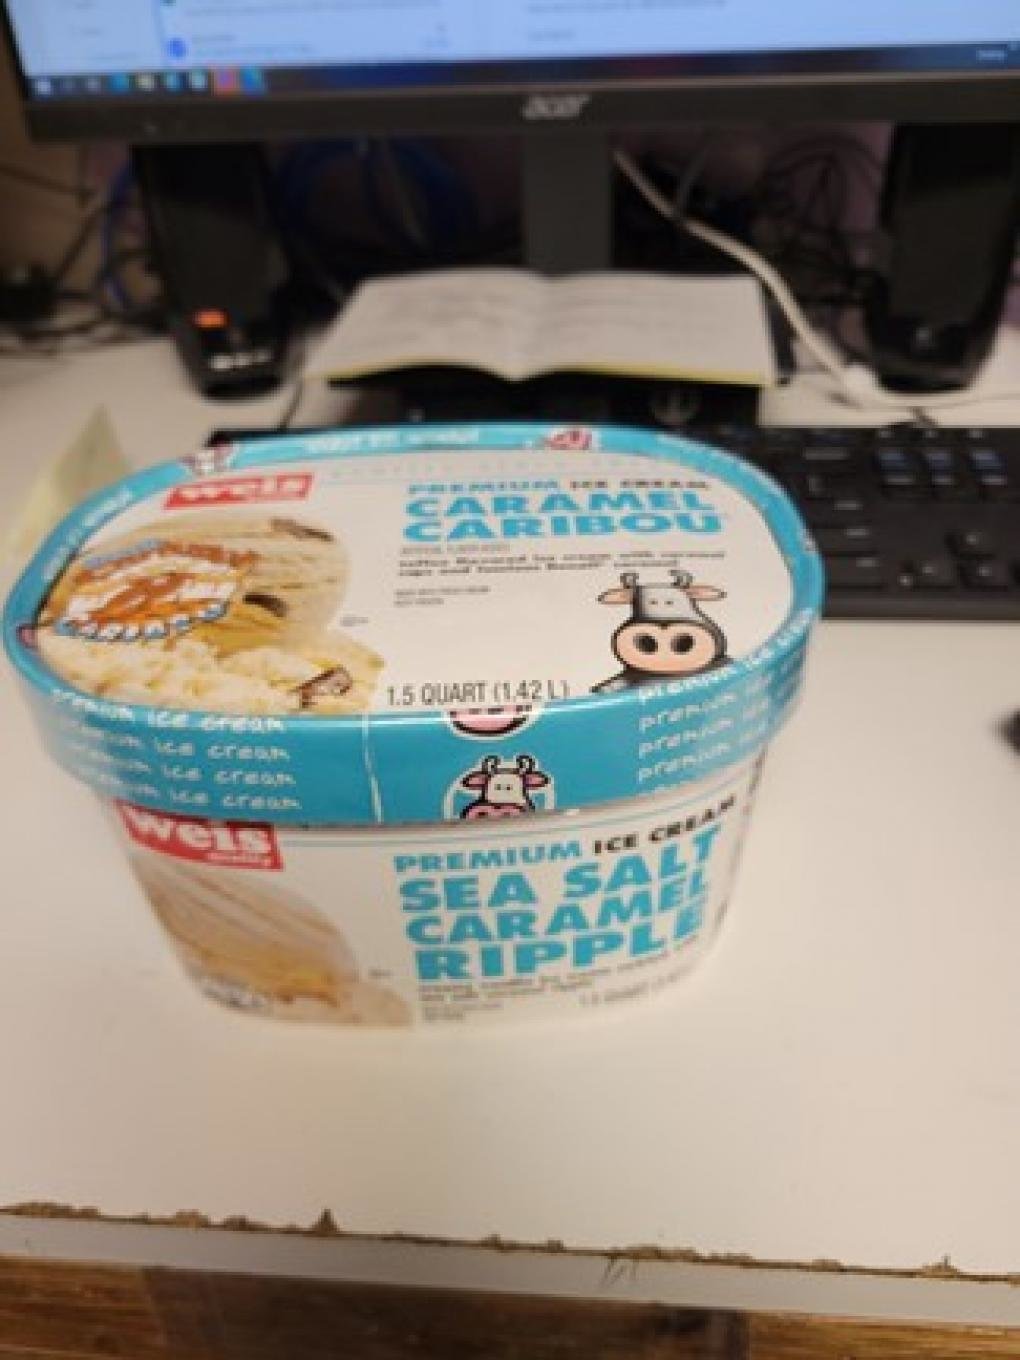 Certain containers of sea salt caramel ripple ice cream, under the Weis Quality brand, have been recalled due to undeclared allergens.